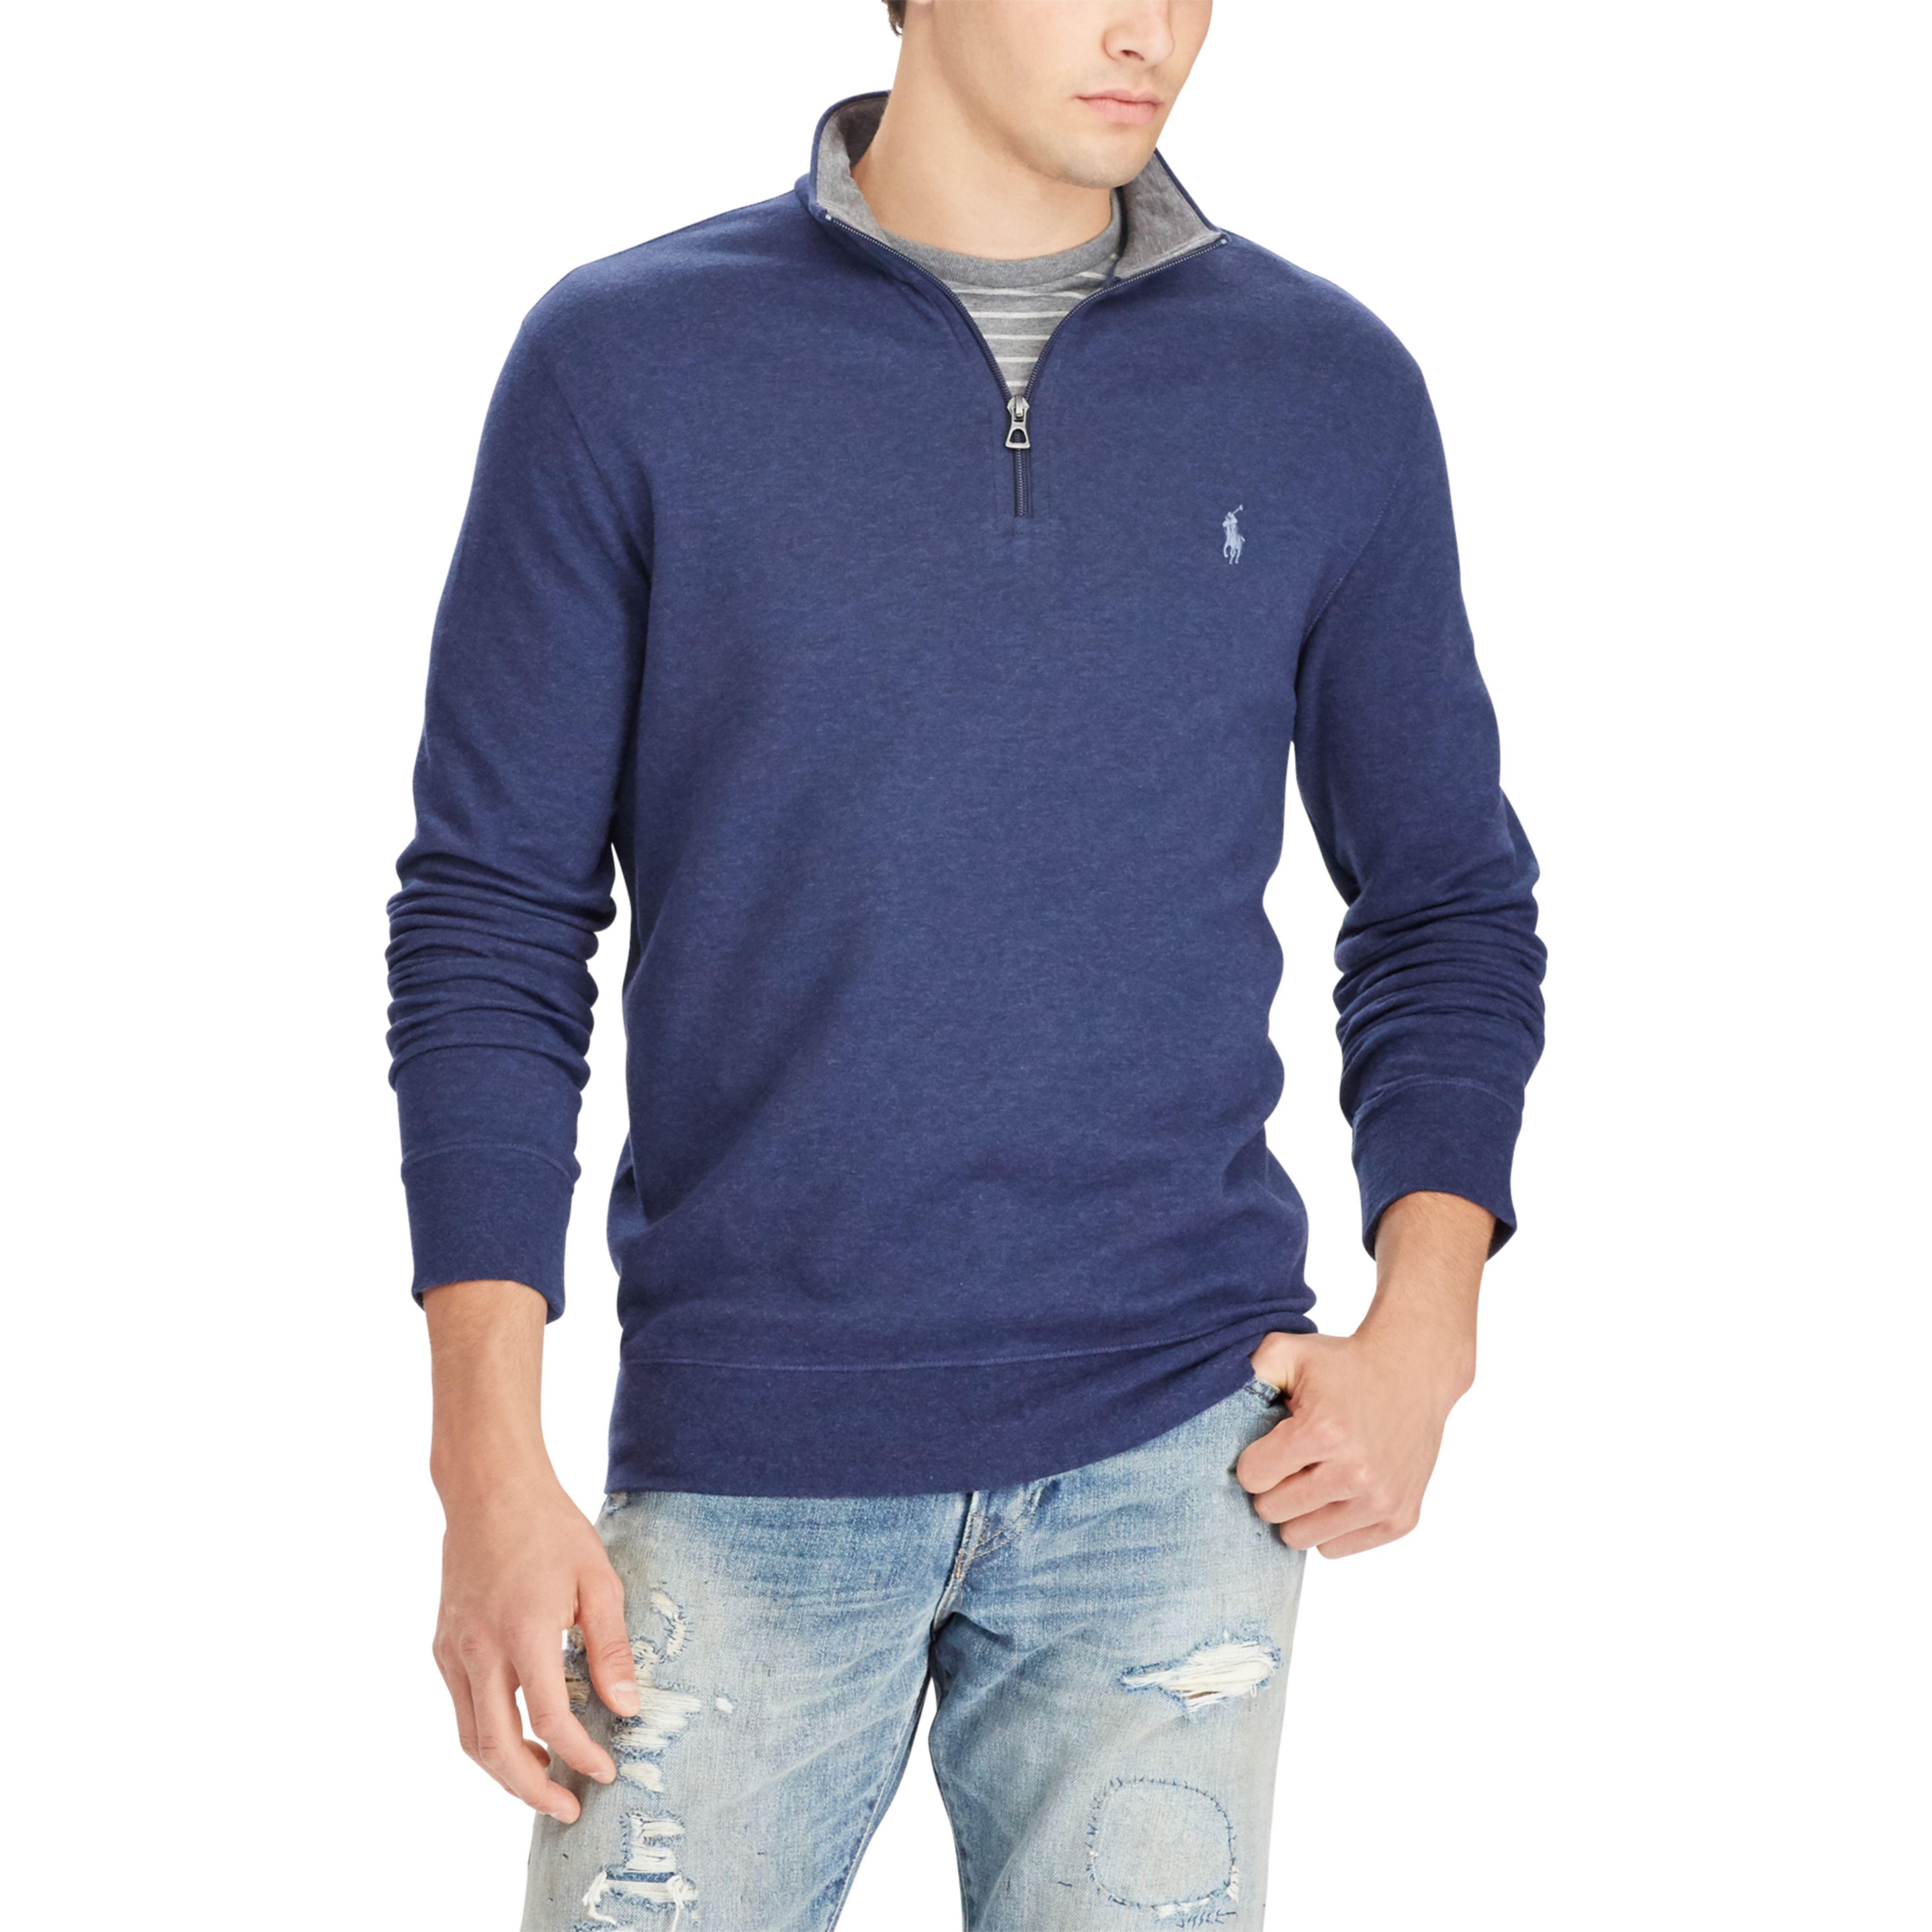 polo luxury jersey pullover